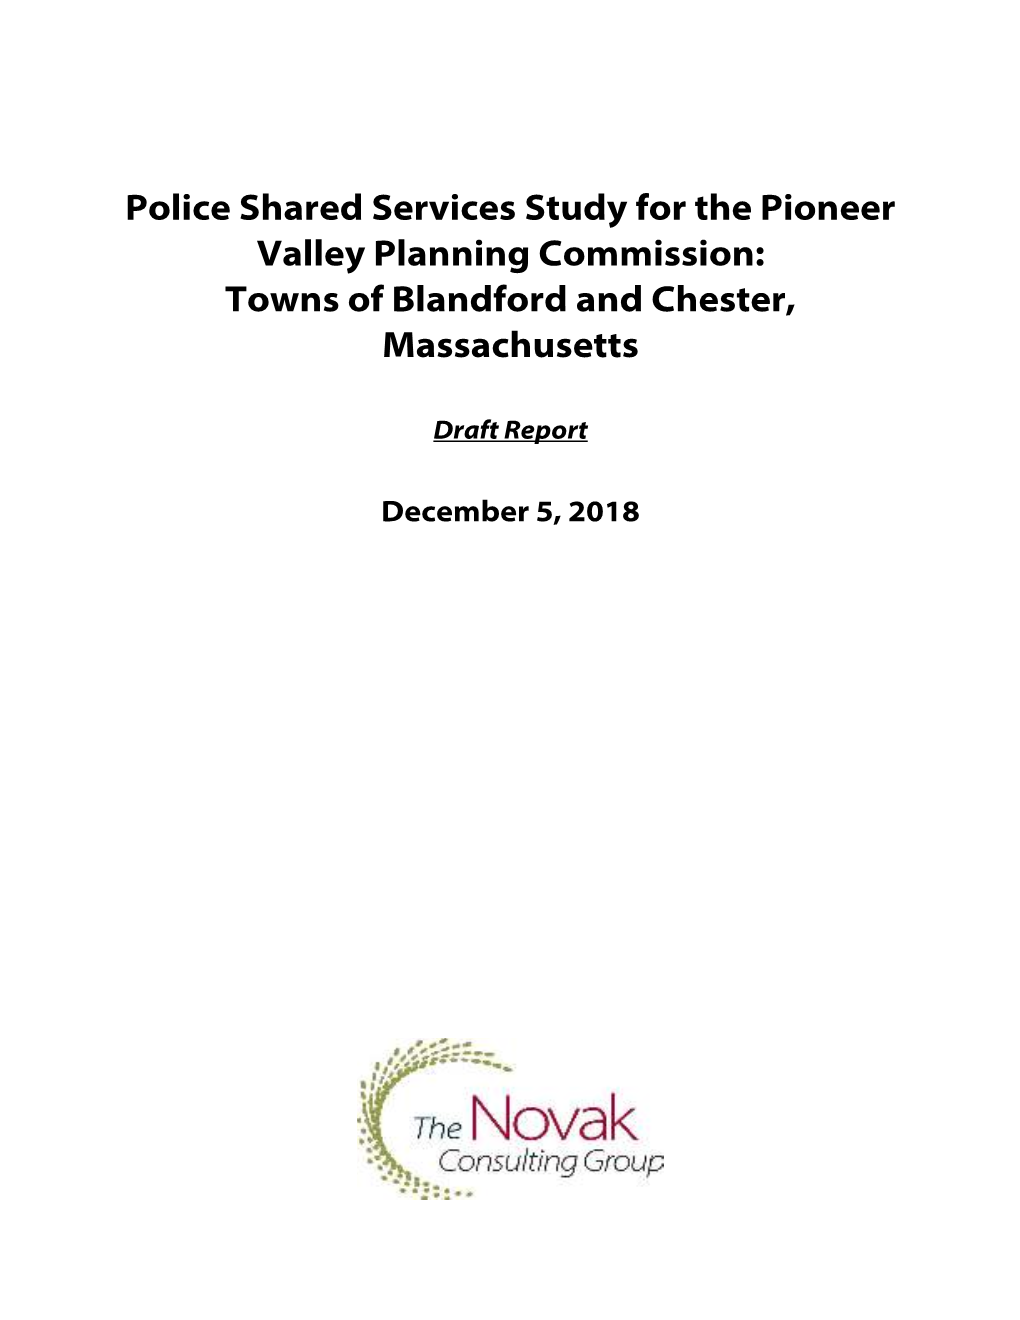 Police Shared Services Study for the Pioneer Valley Planning Commission: Towns of Blandford and Chester, Massachusetts